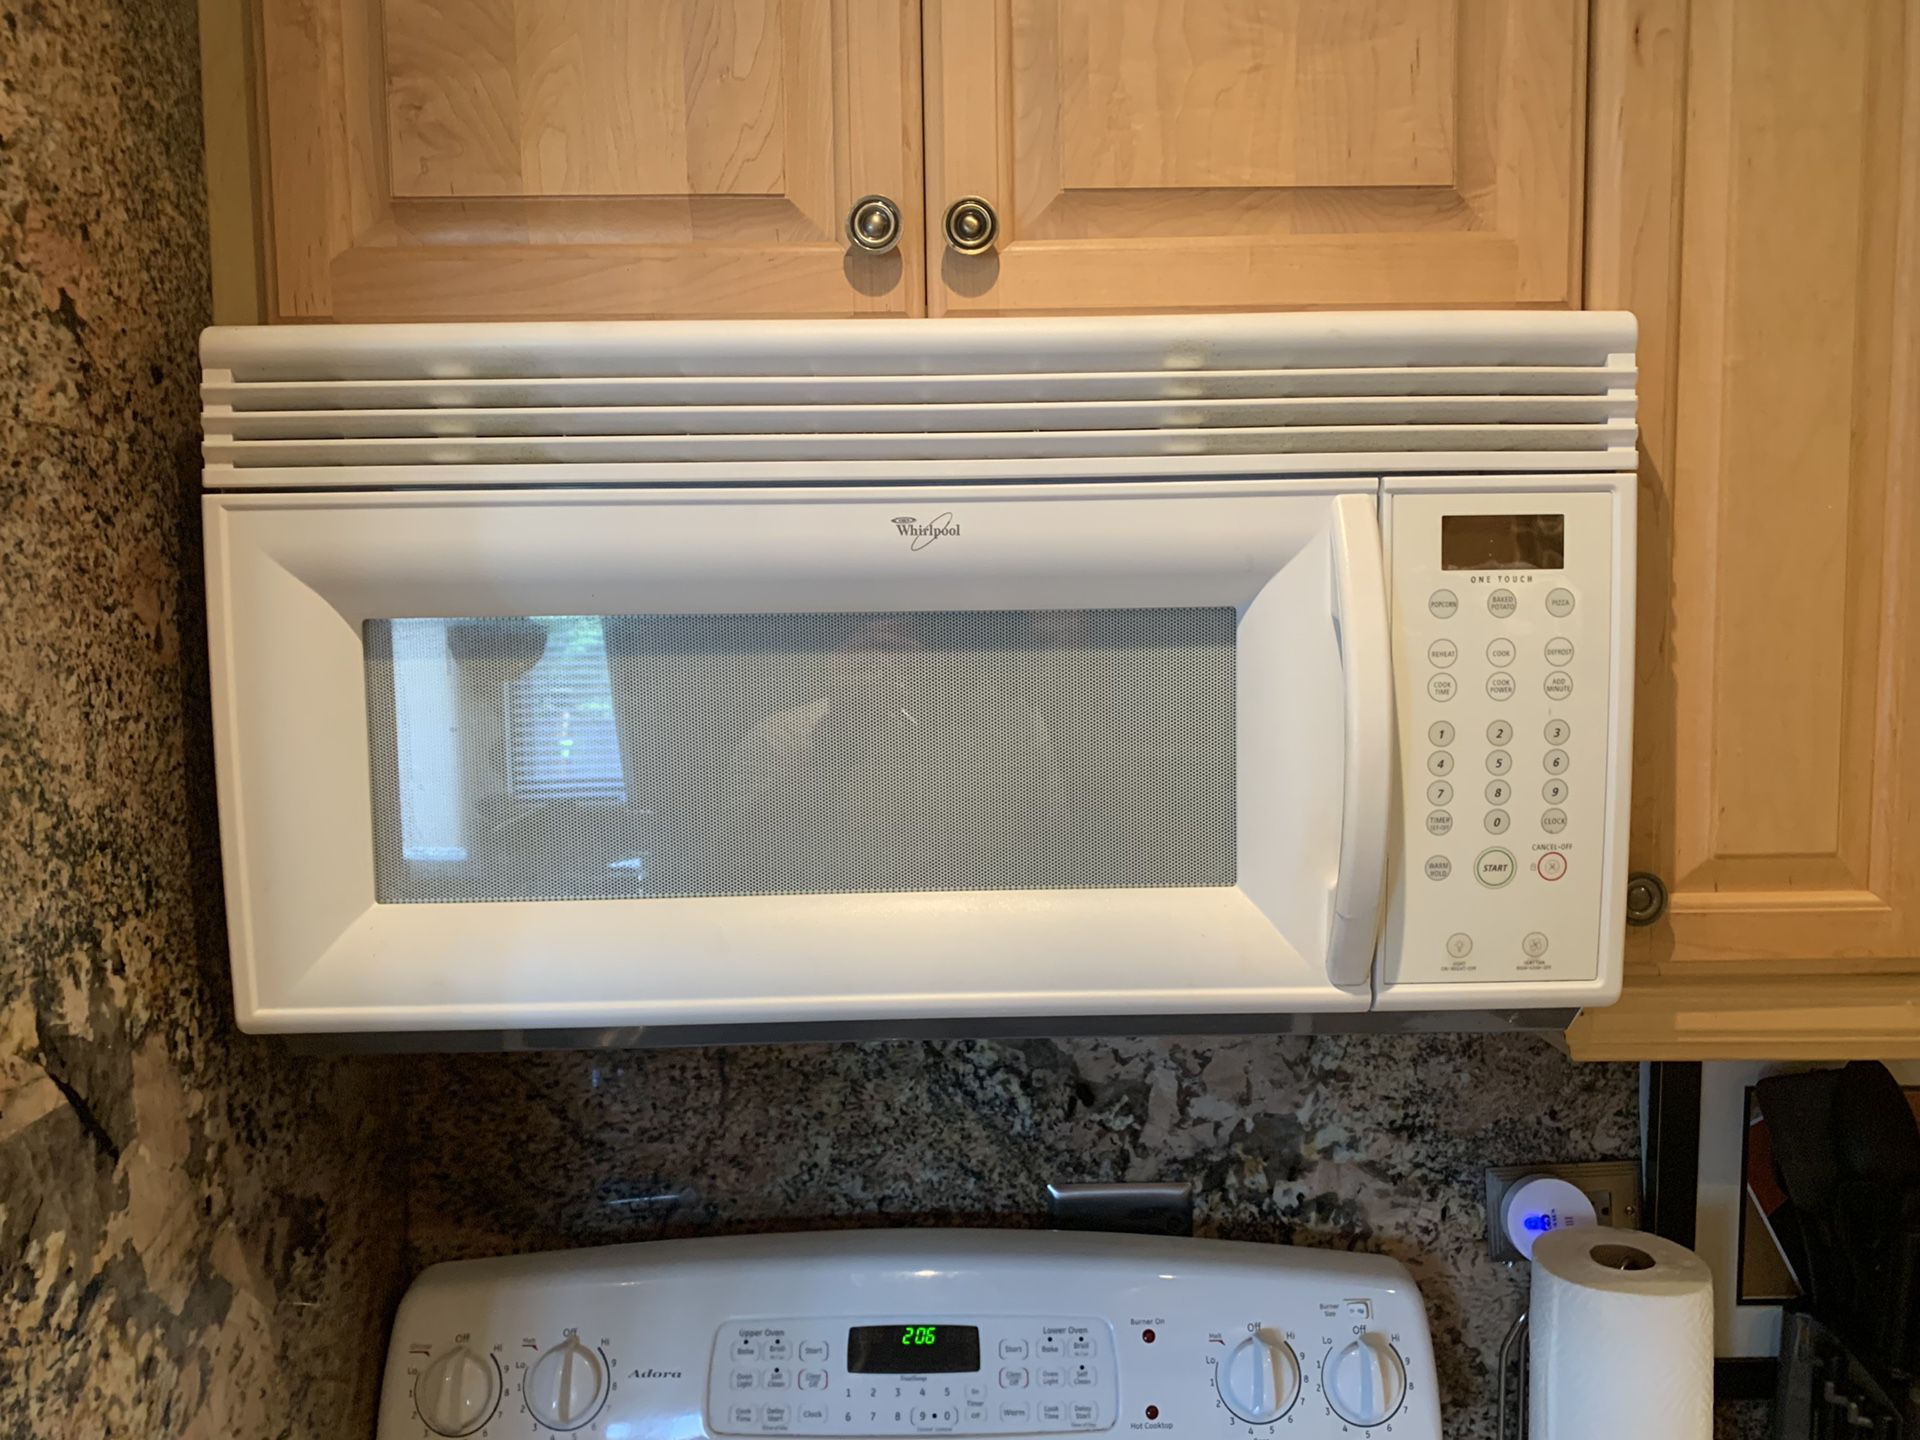 Good working Whirlpool microwave with vent